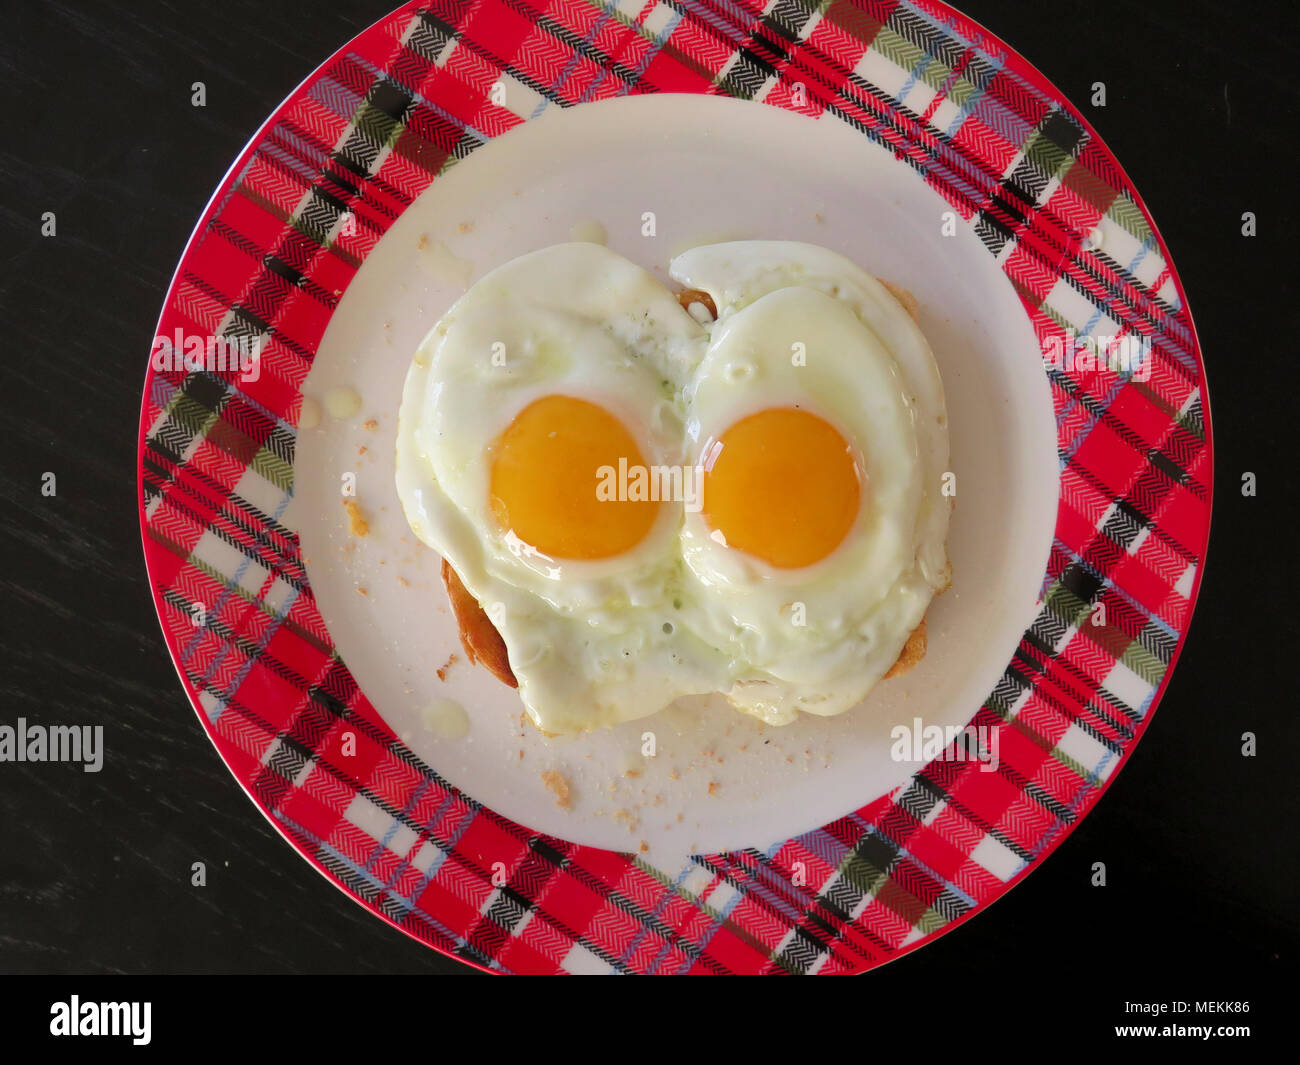 Two Fried Eggs Stock Photo, Picture and Royalty Free Image. Image 17696336.